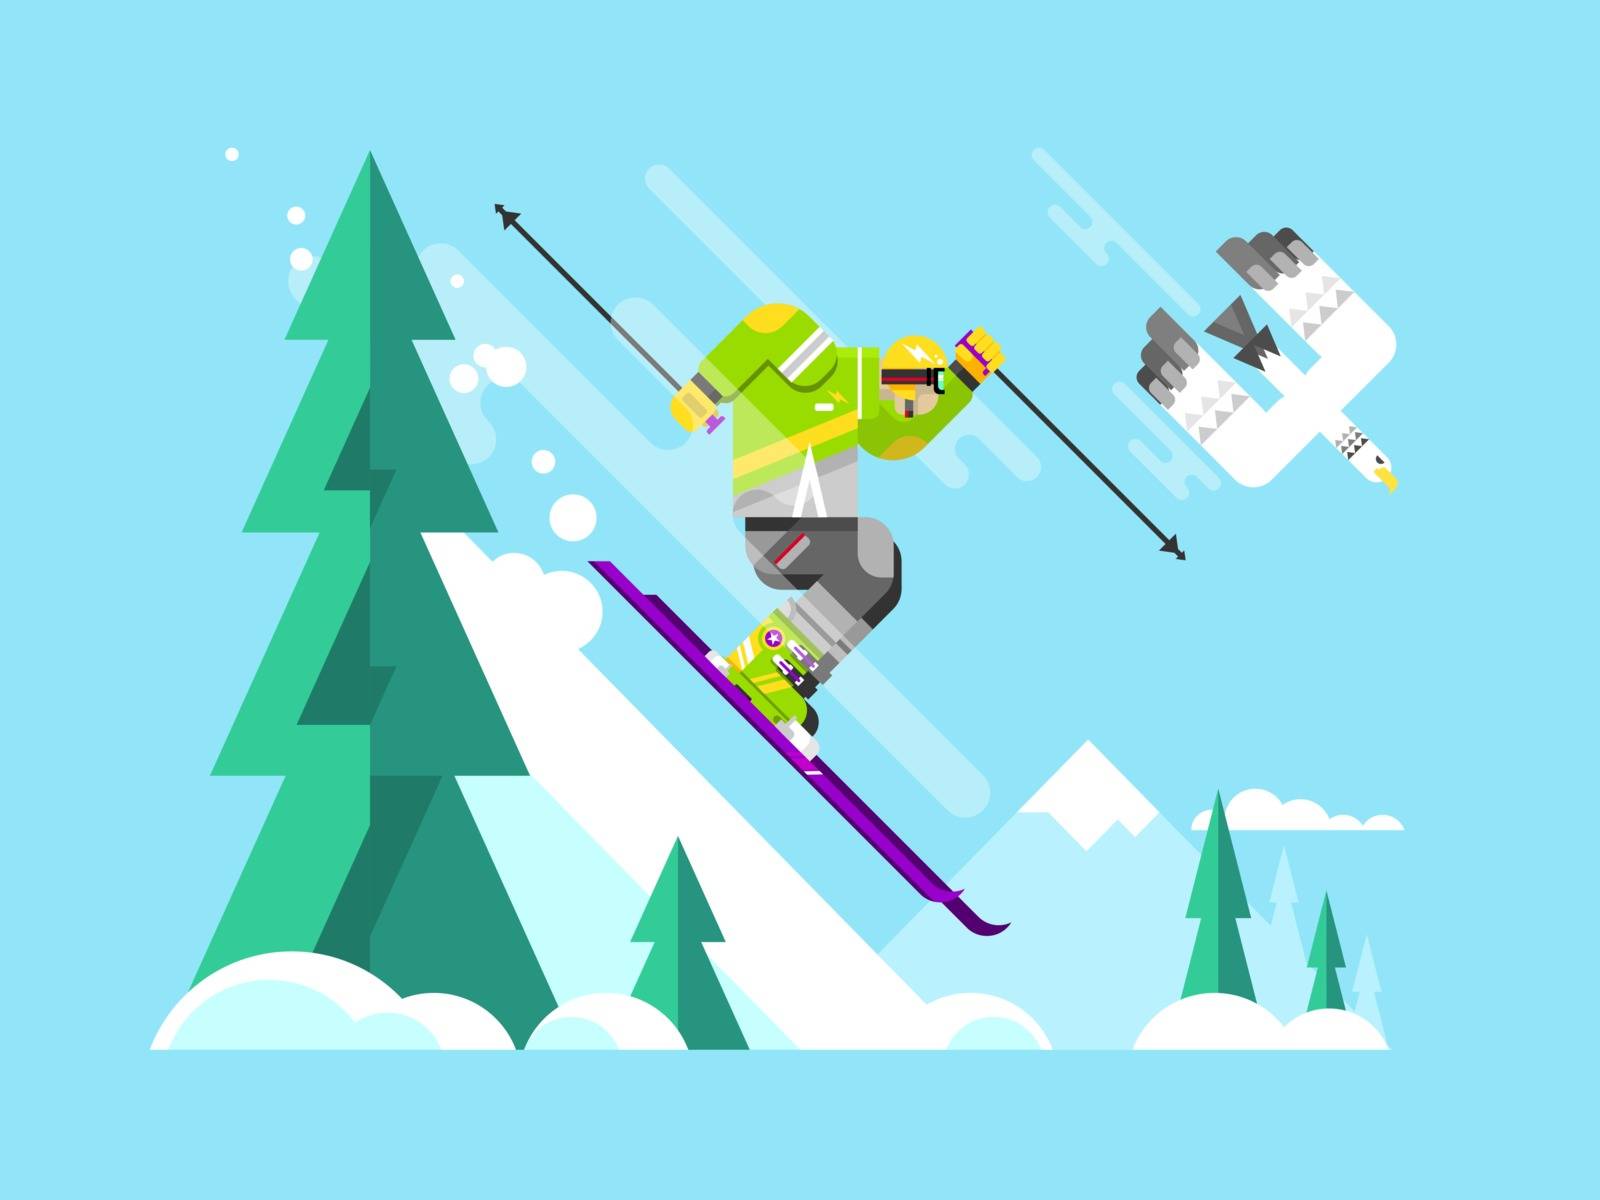 Cartoon character skier. Sport winter, snow and speed extreme, flat vector illustration